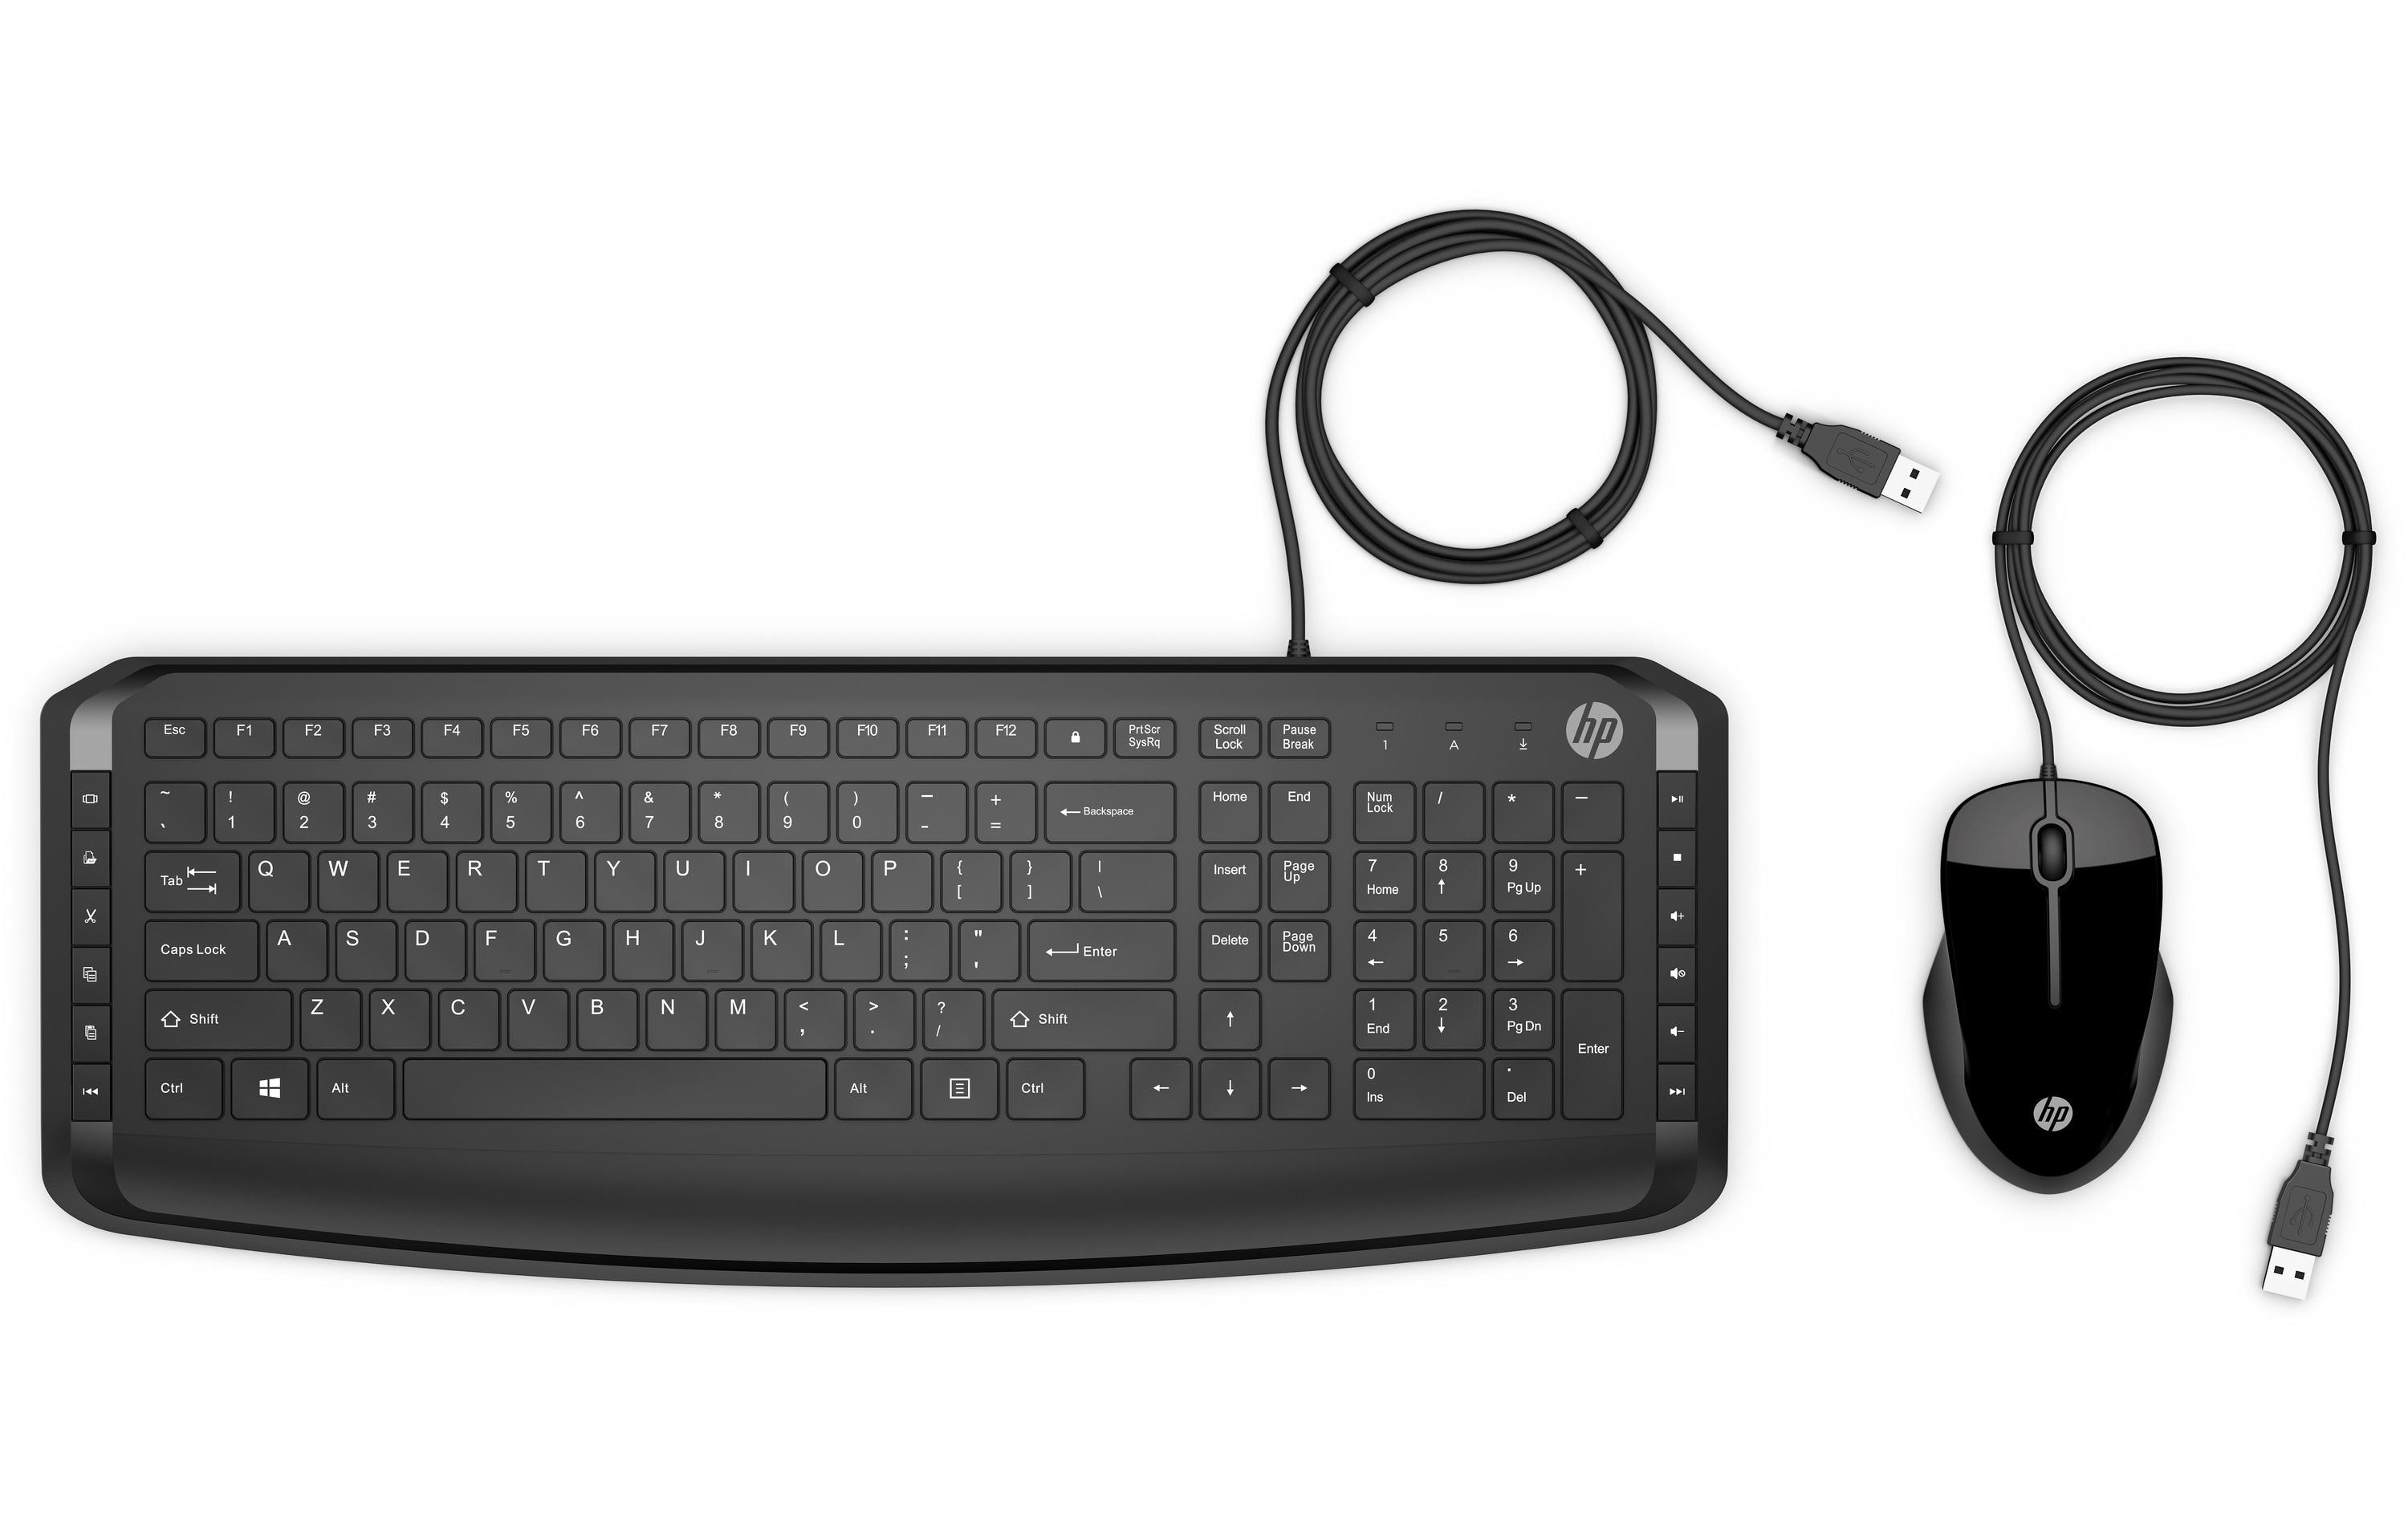 HP Pavillion Keyboard and Mouse 200